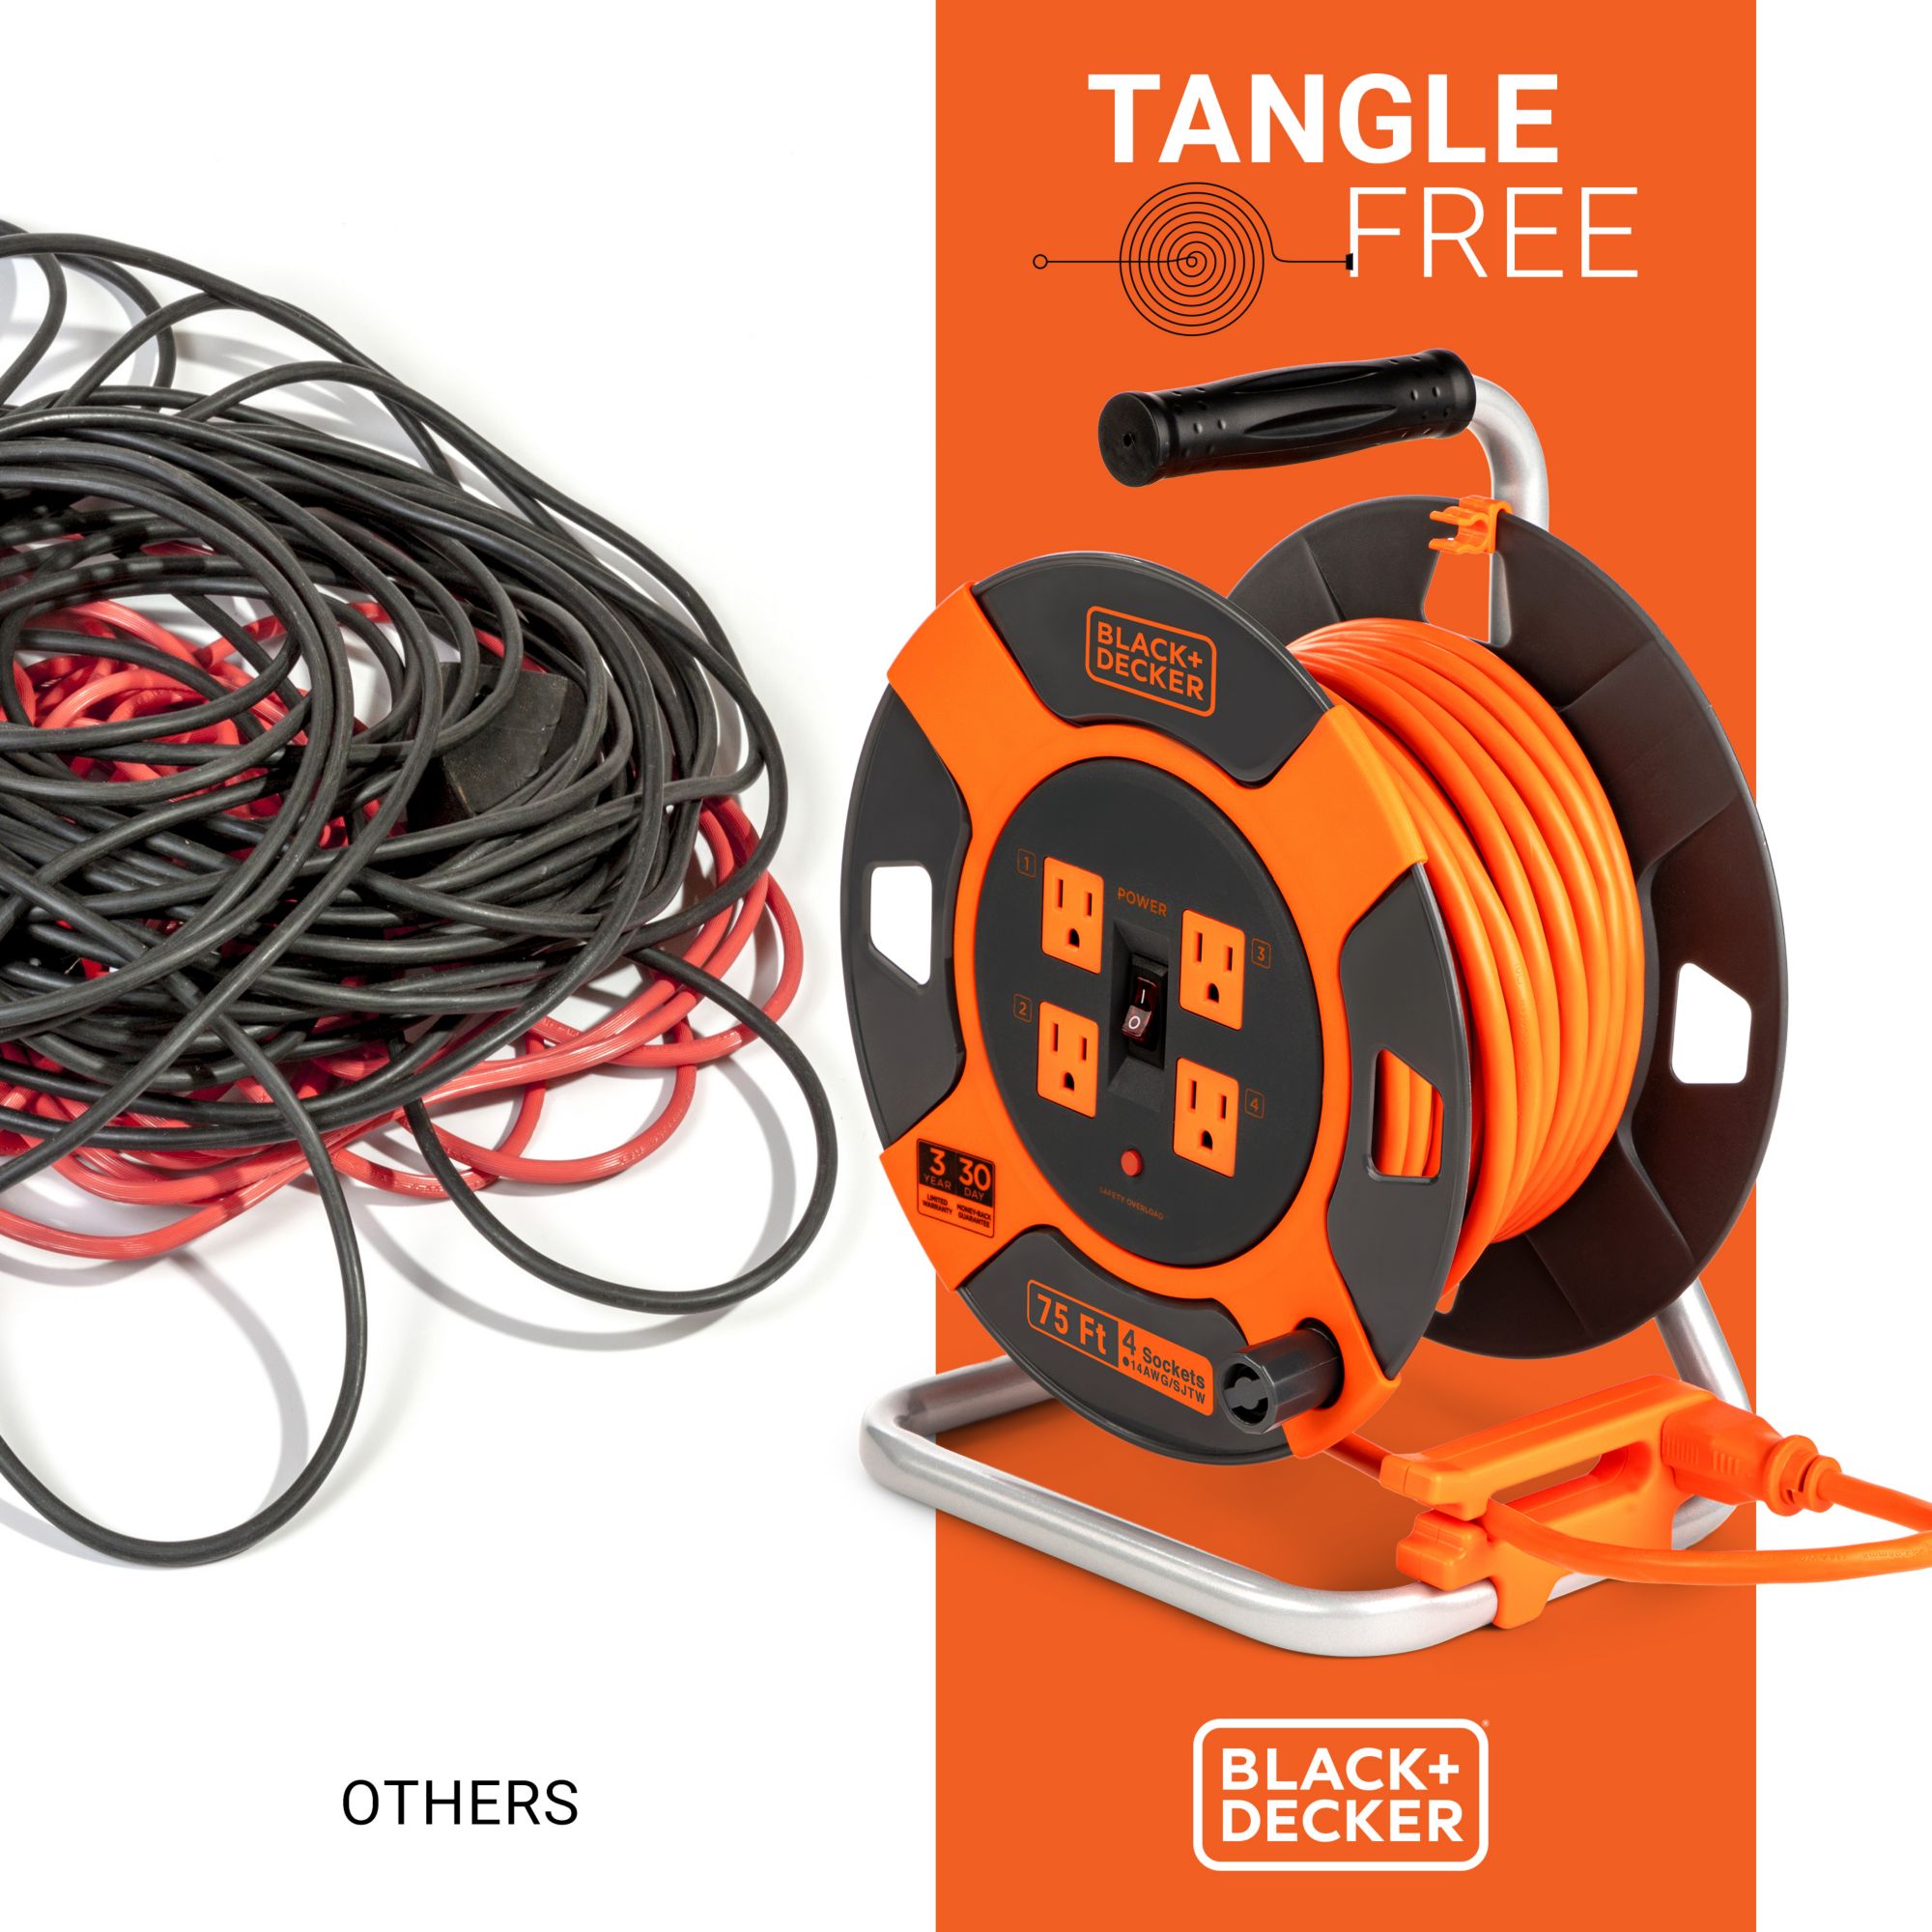 Are Cord Reels for Winding Extension Cords Any Good? 